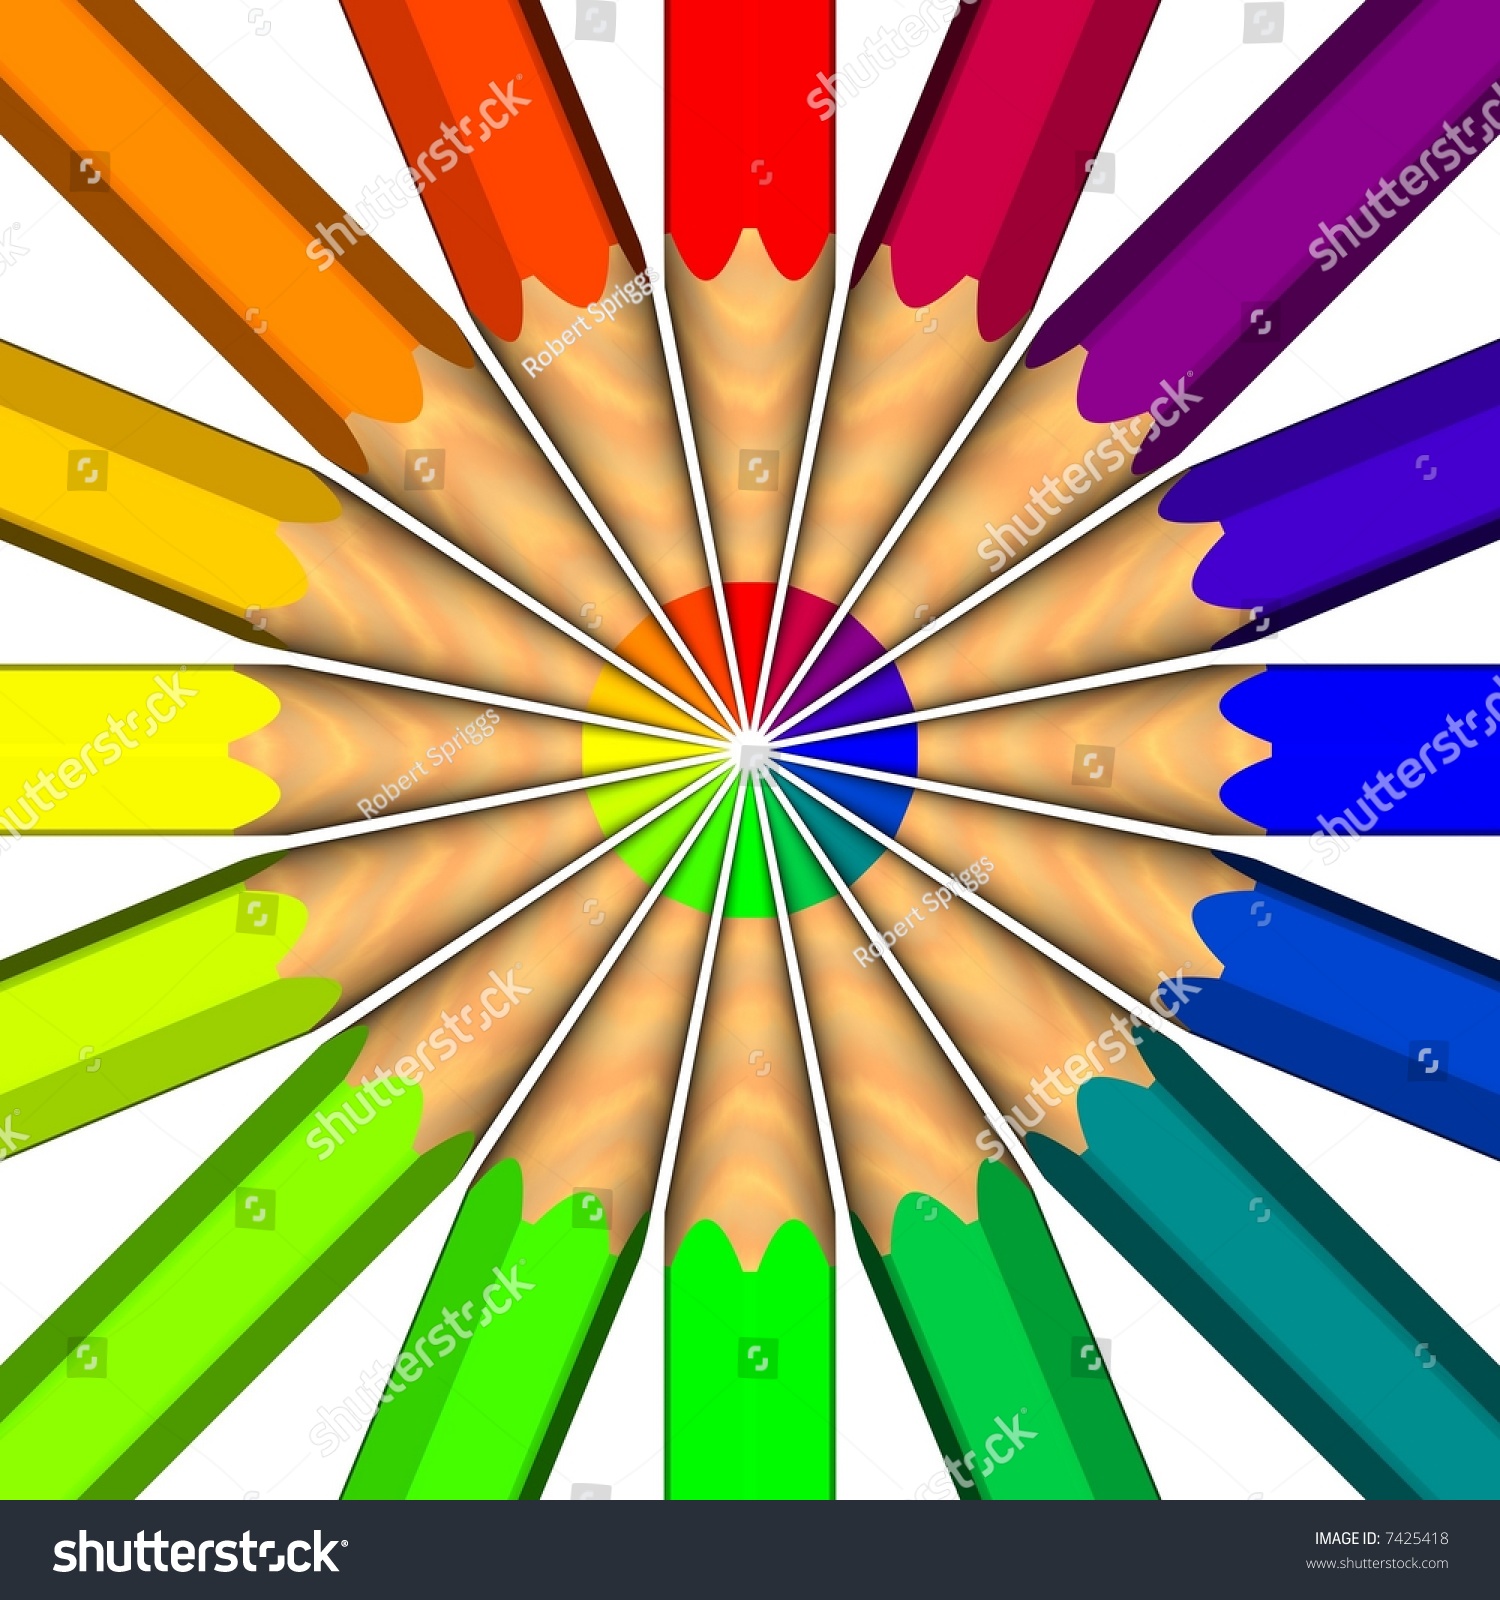 Perfect Circle Of Colored Pencils Stock Photo 7425418 : Shutterstock